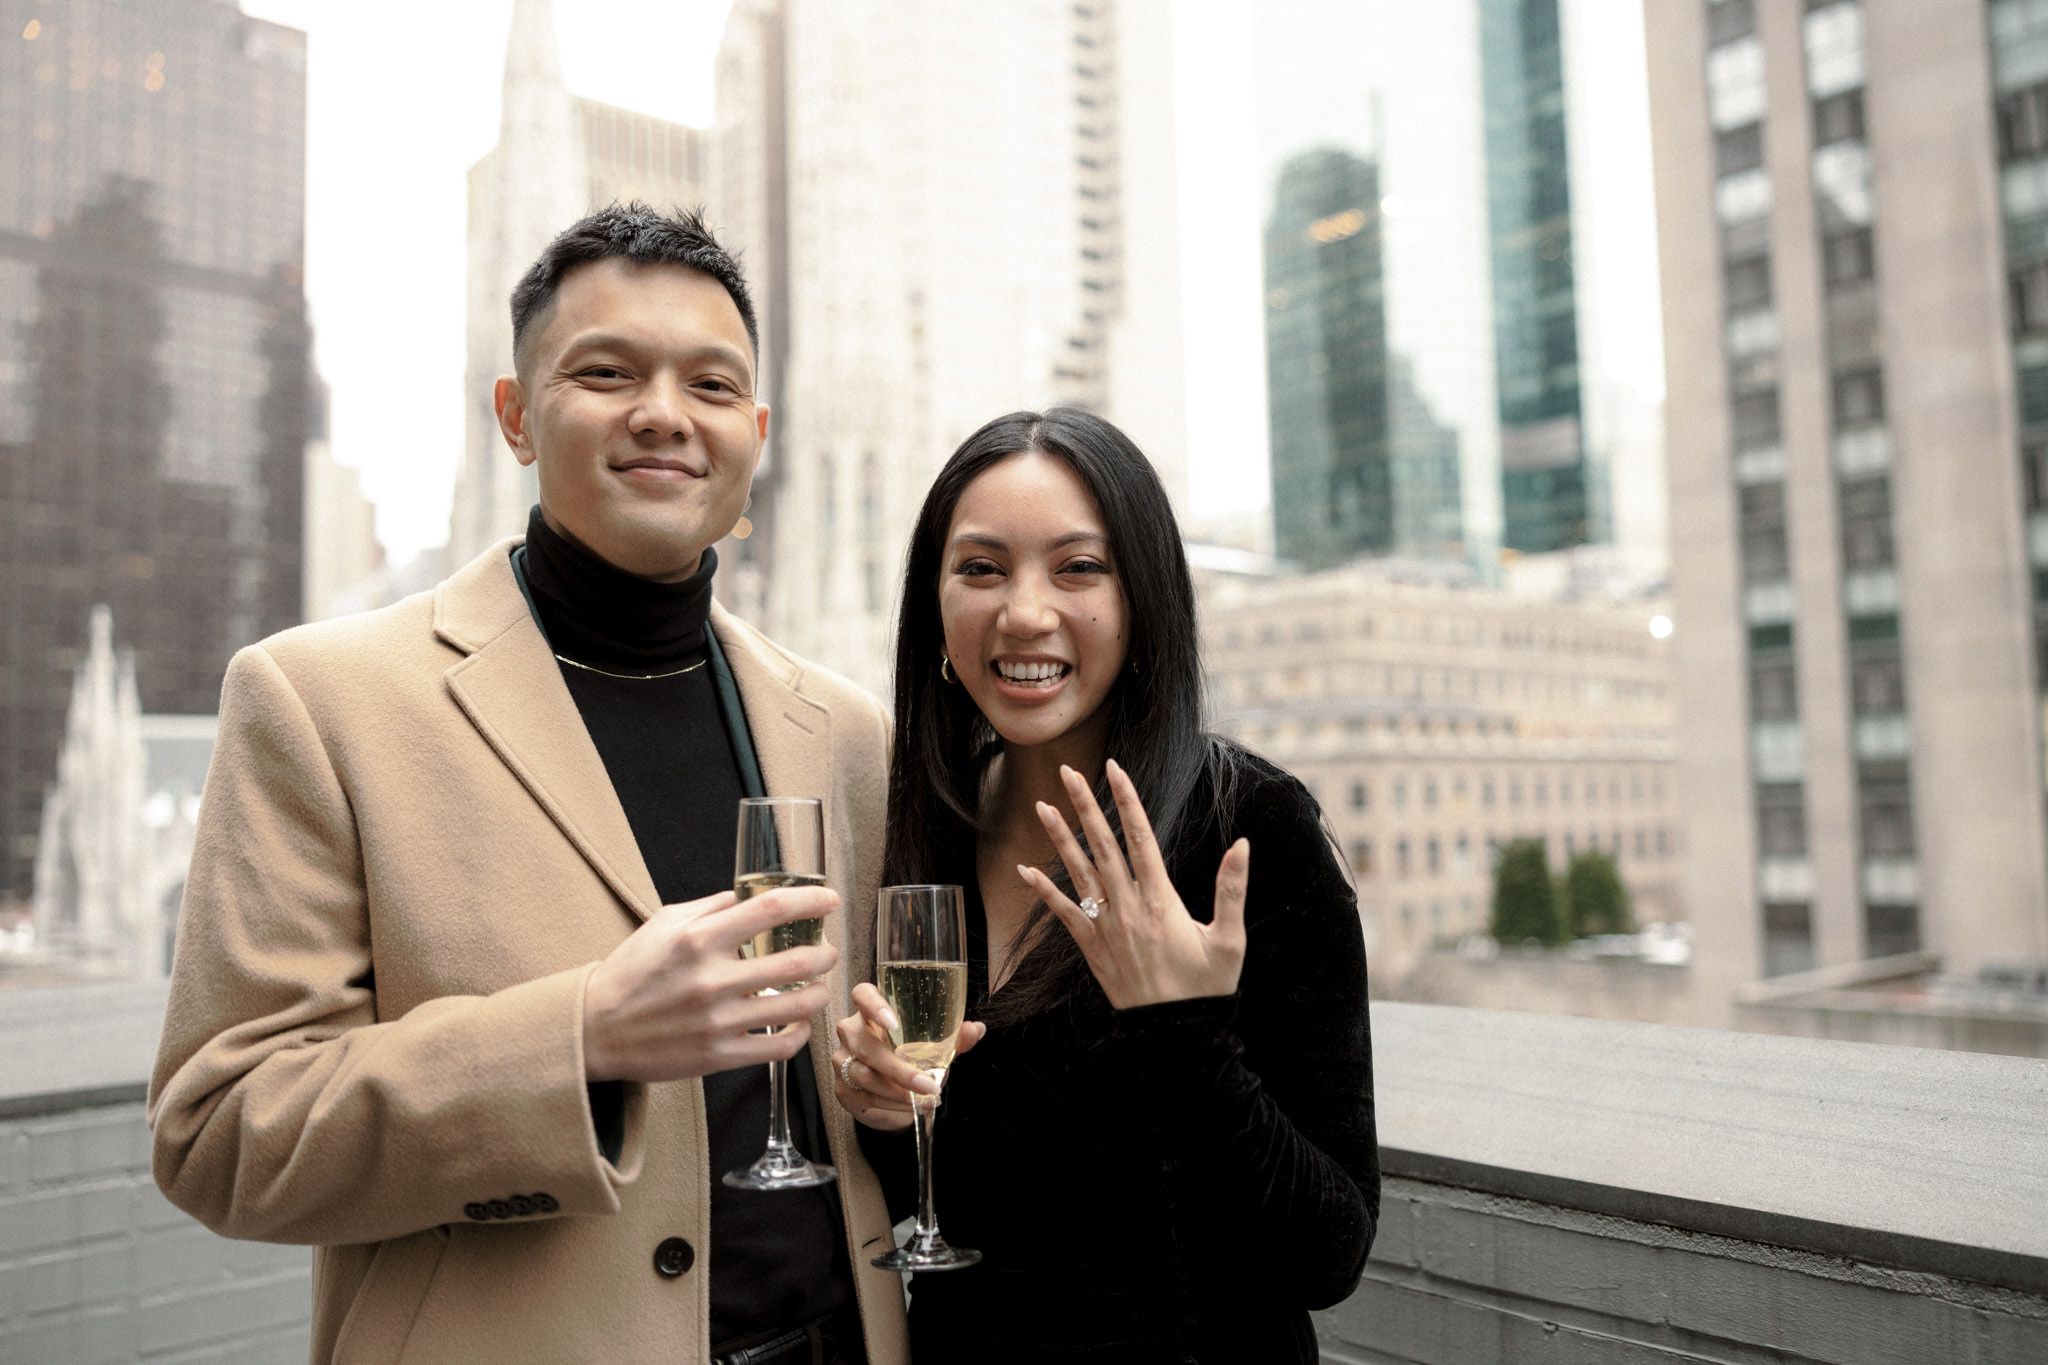 The newly engaged couple are happily drinking champagne after the proposal. Image by Jenny Fu Studio